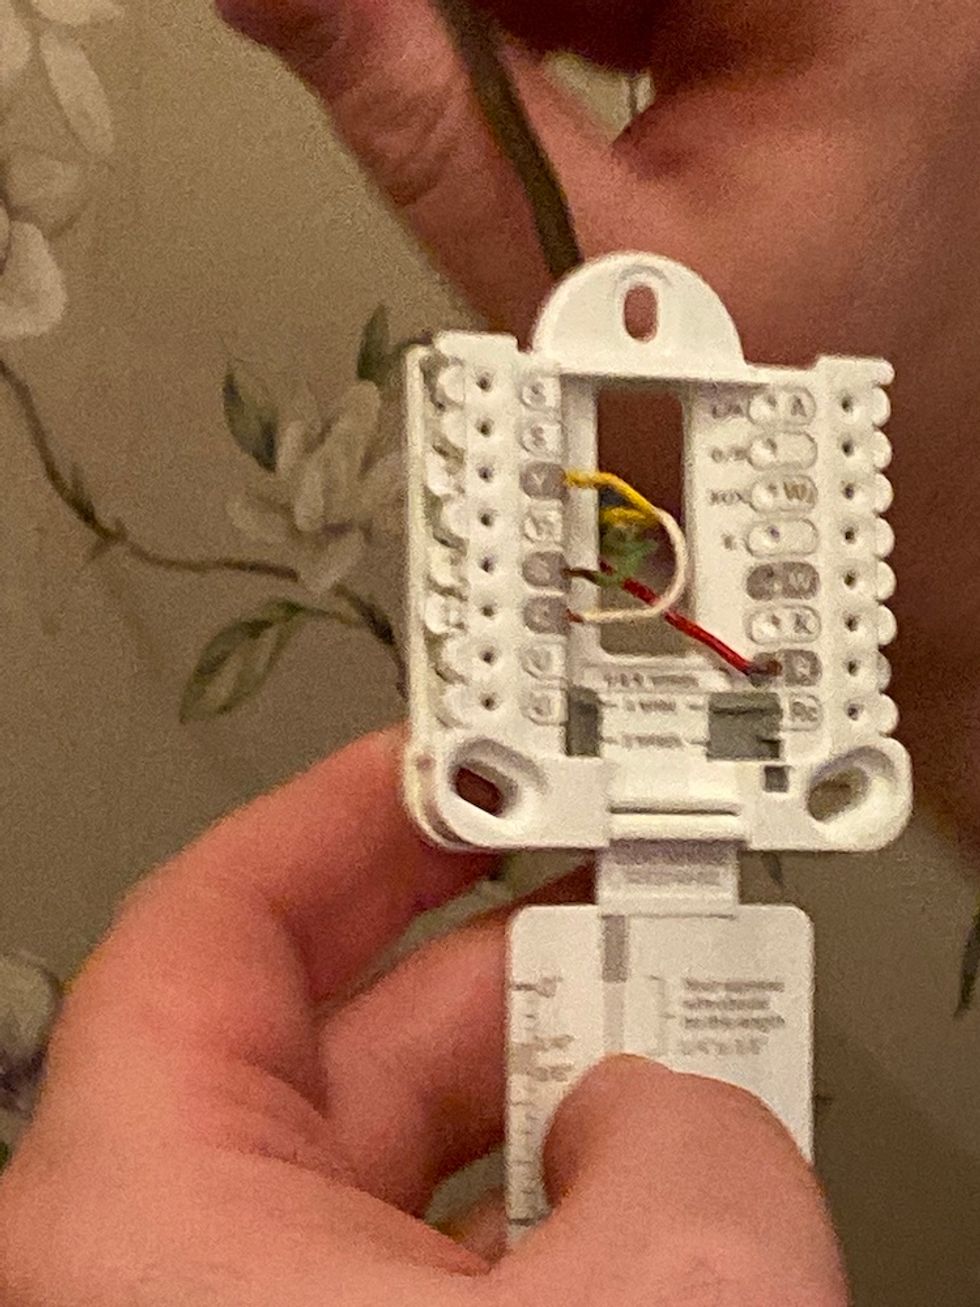 Photo of wires being inserted into Honeywell Home T9 mounting bracket.